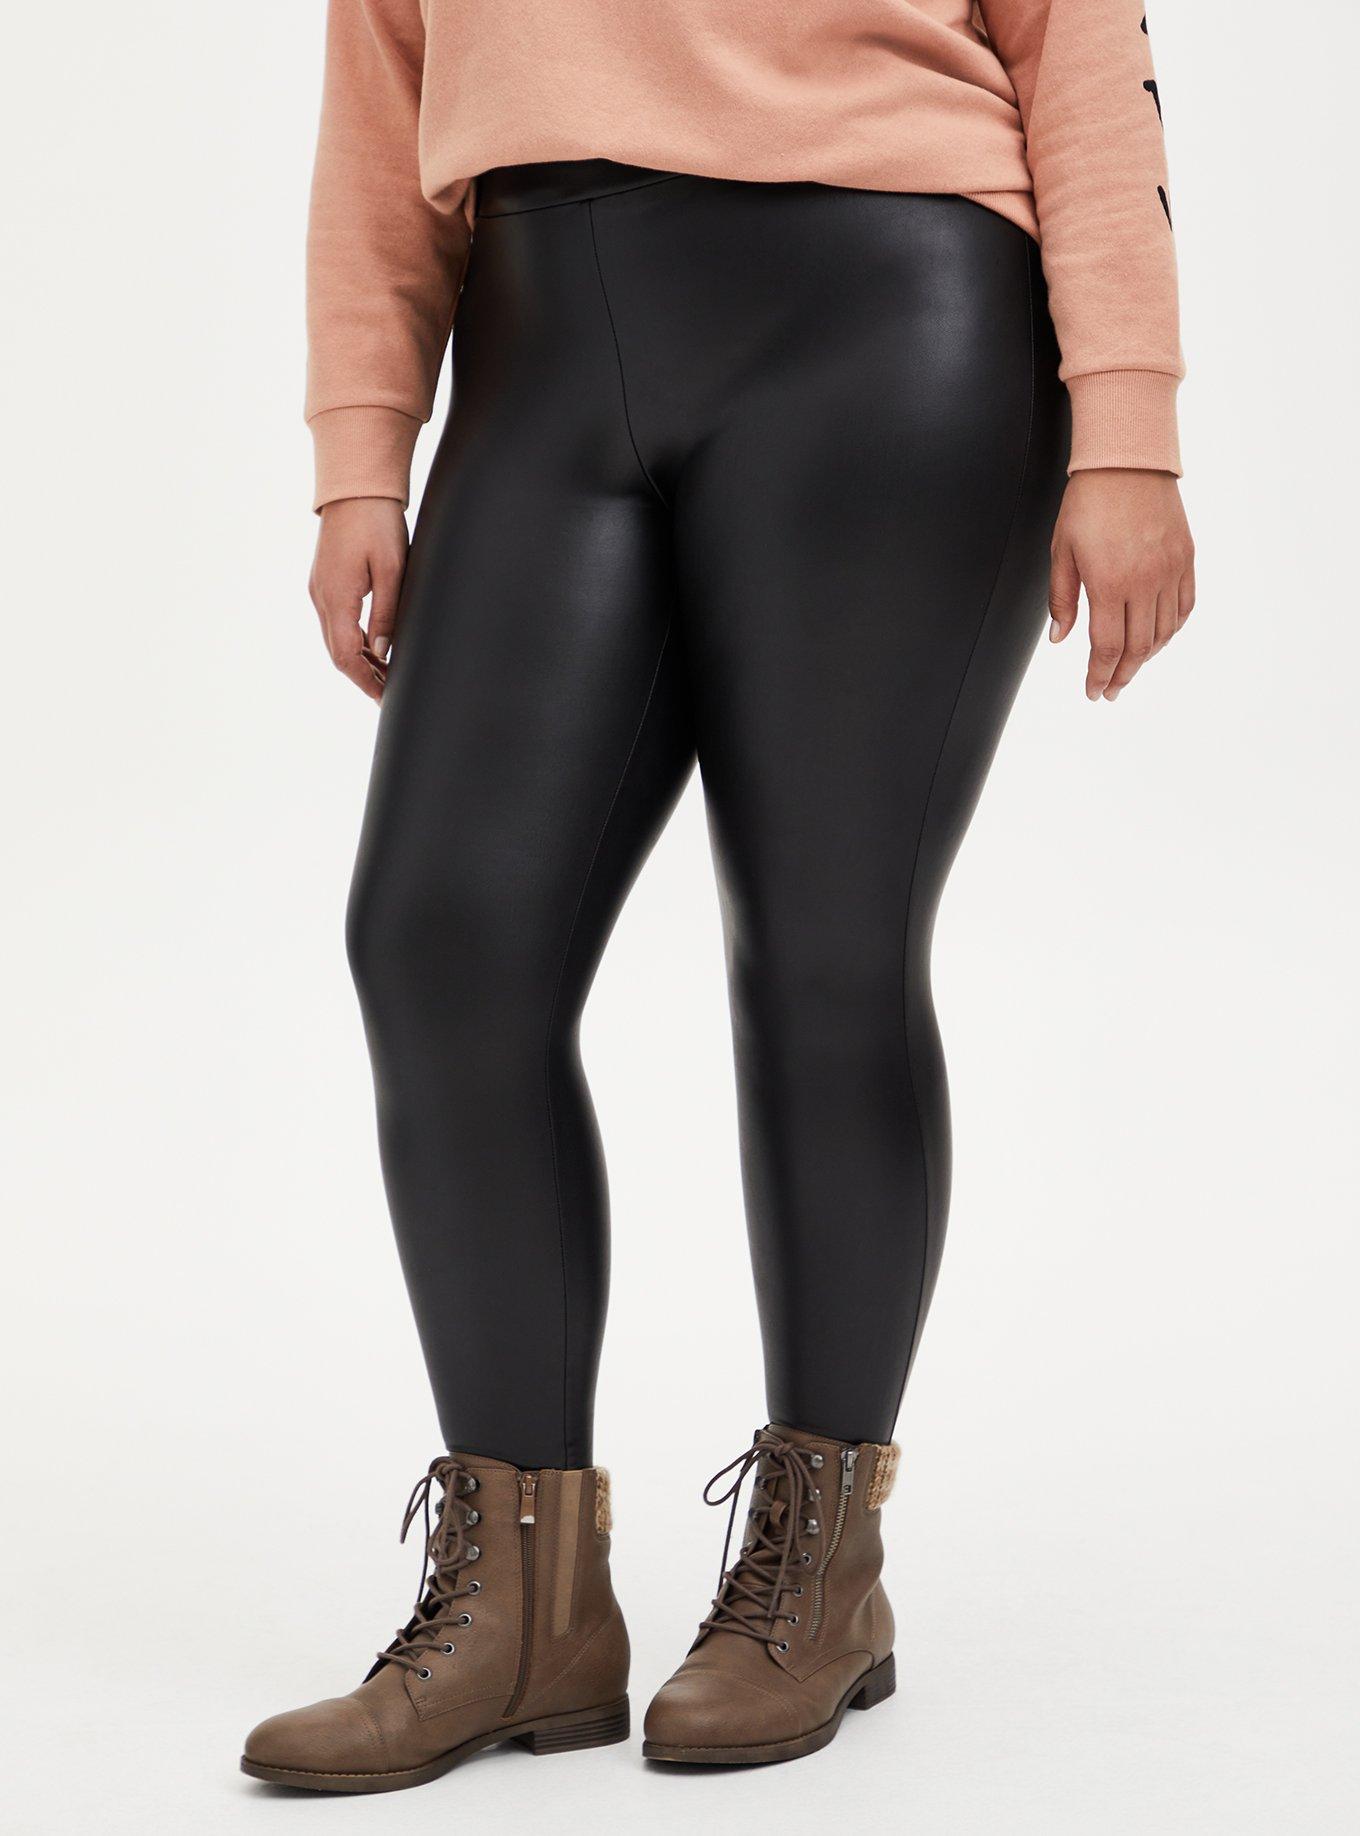 Women's faux leather thermal leggings with buttons black, 21,95 €